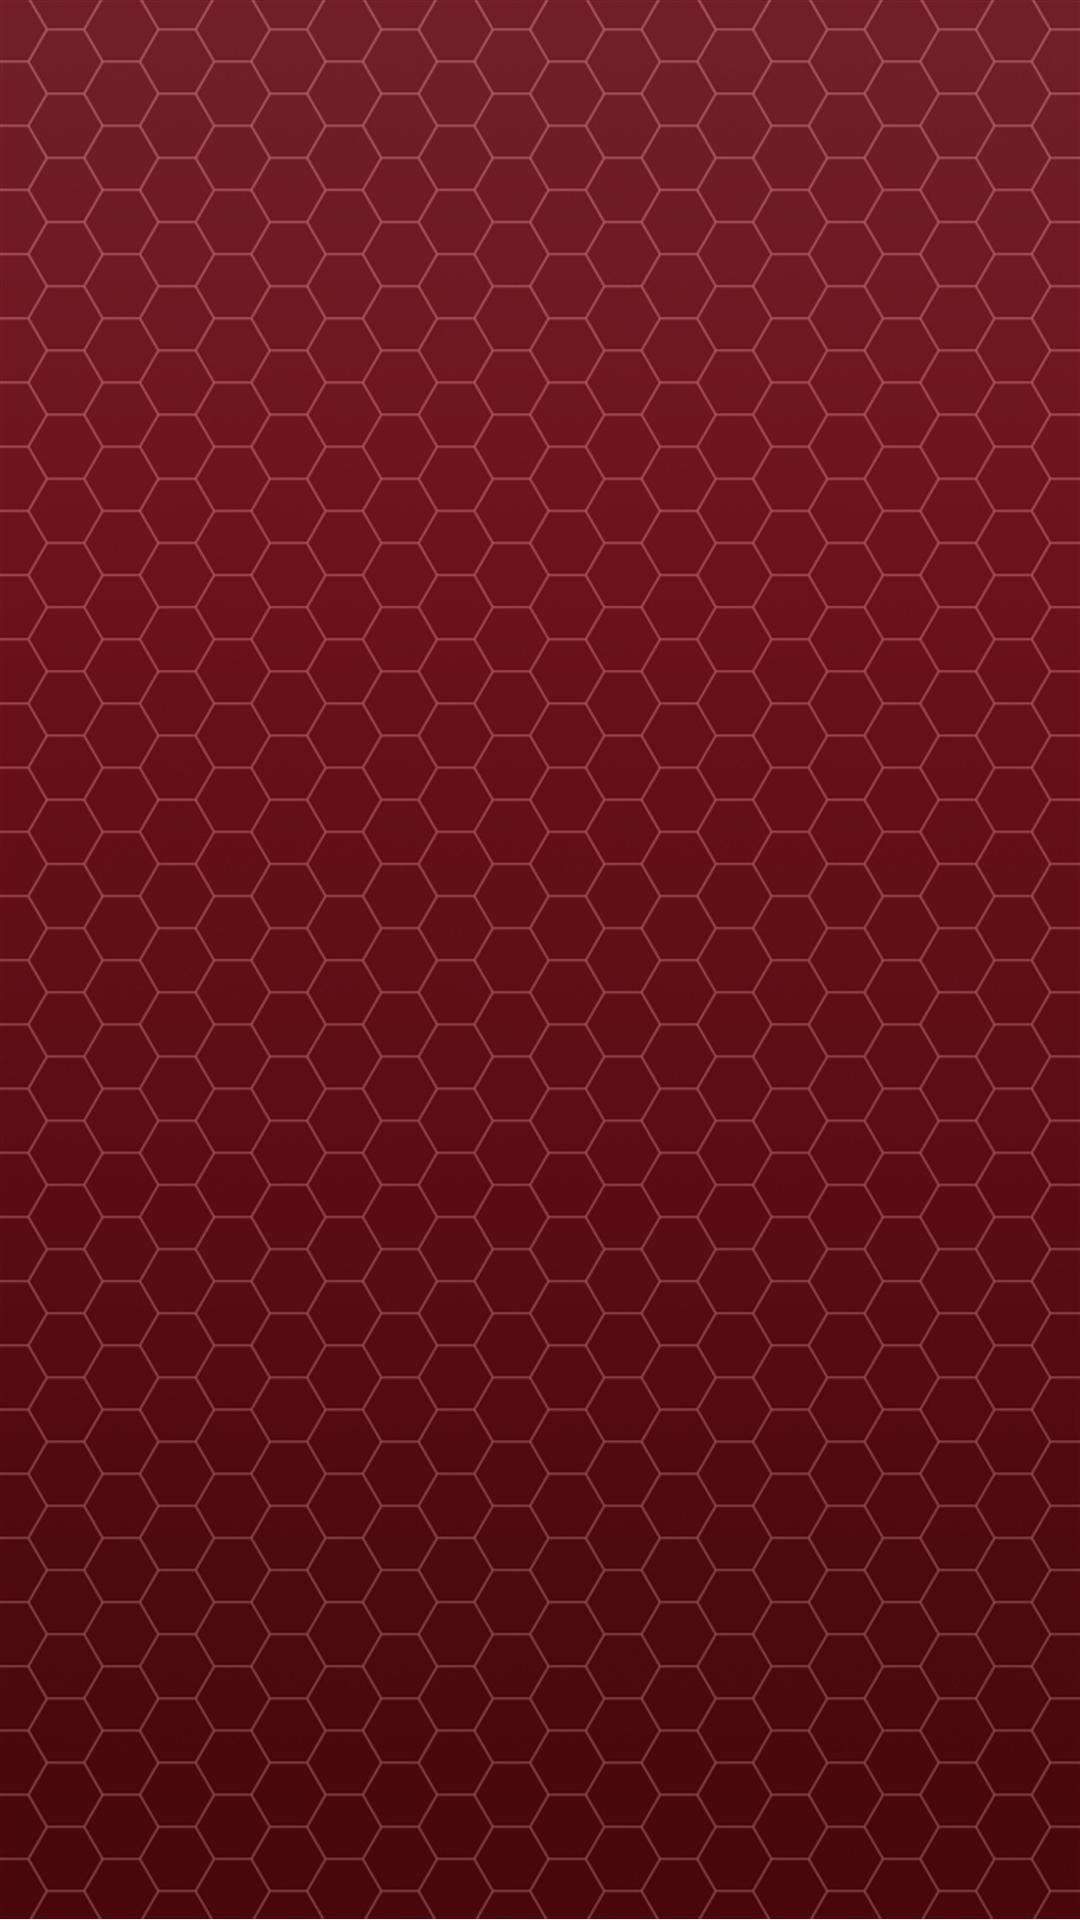 Honeycomb Red Pattern Android Wallpaper